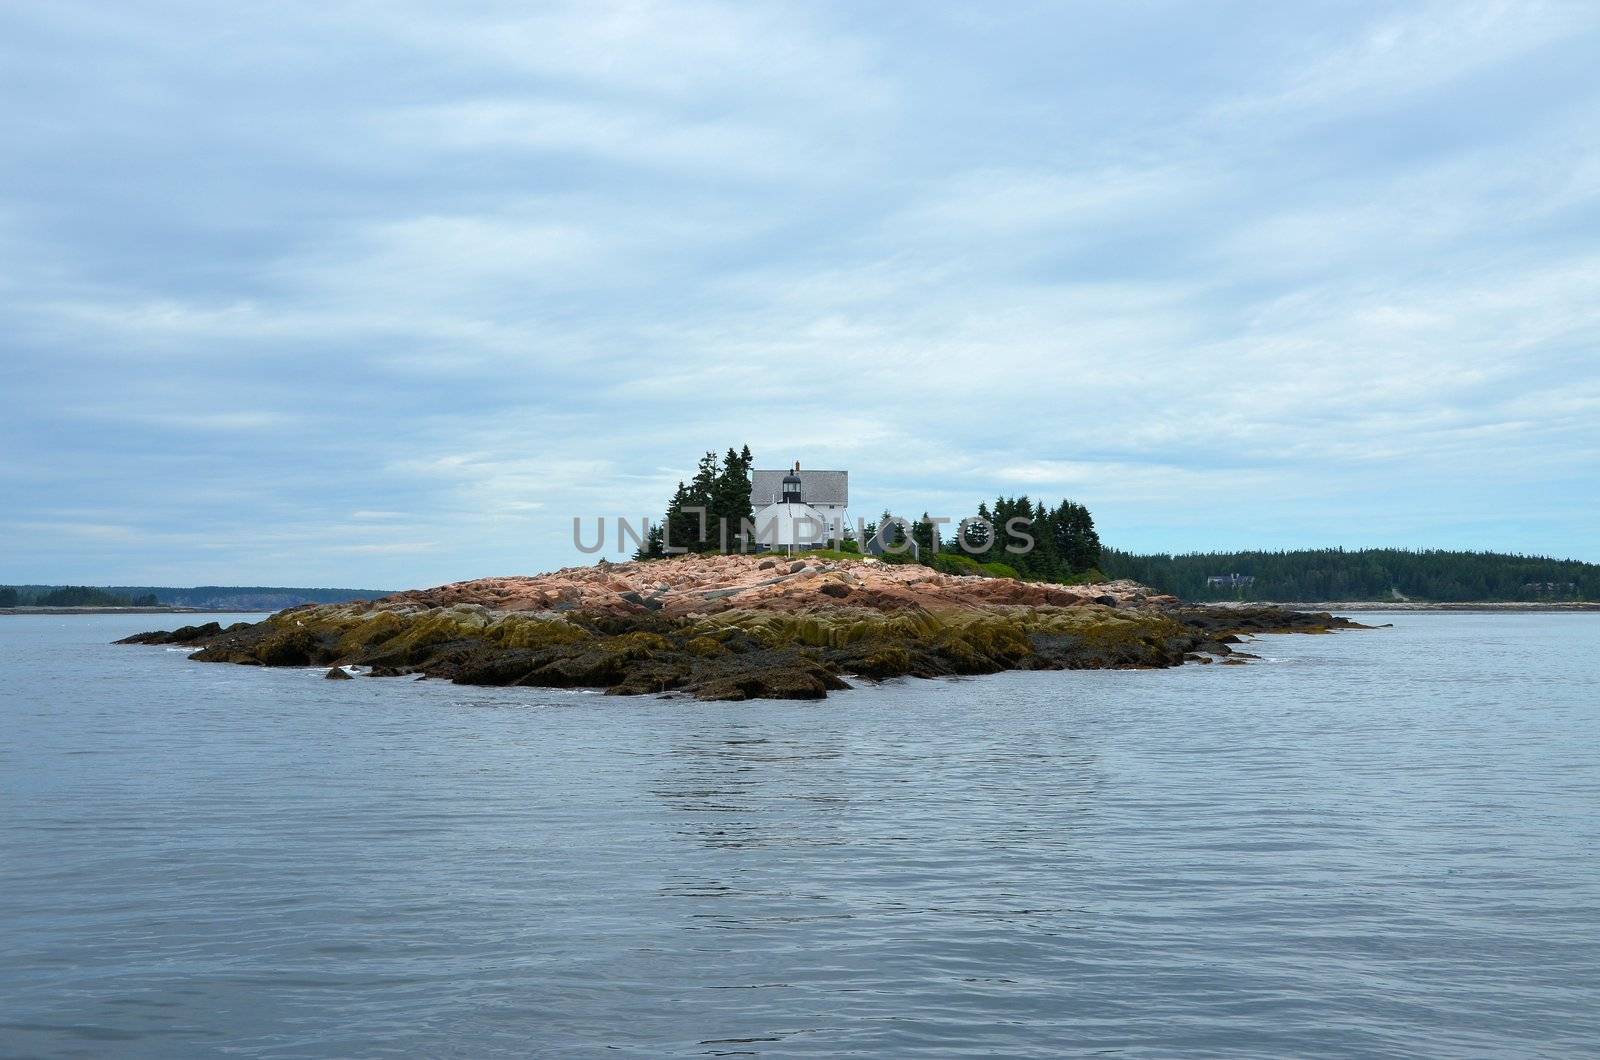 One of several lighthouses in Bar Harbor area of Maine